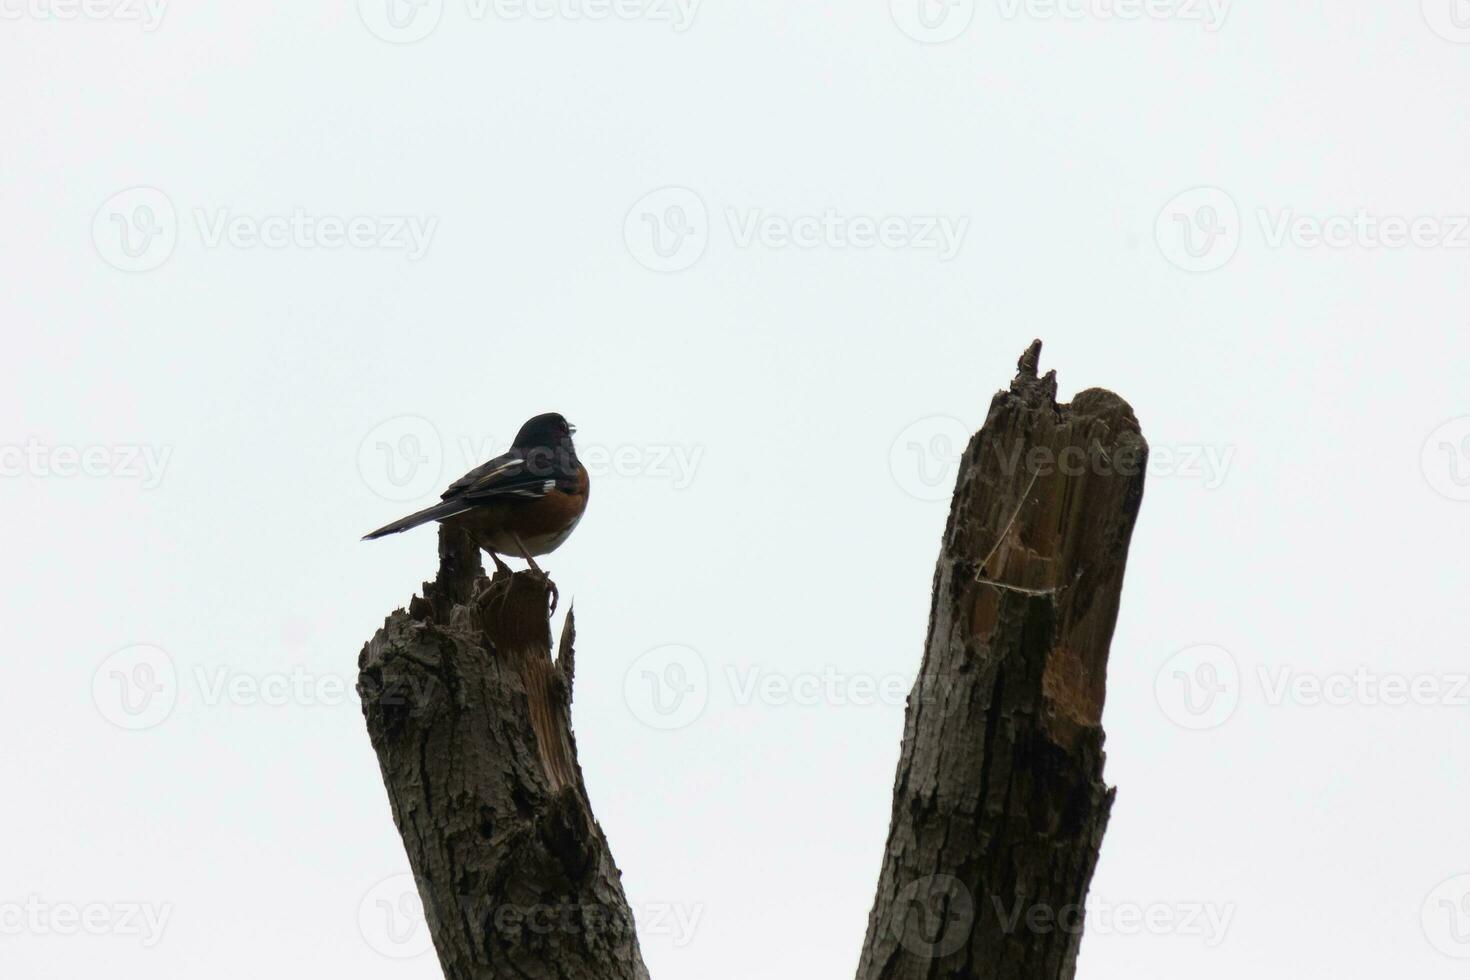 This Baltimore Oriole is perched on this wooden post in the field. His beautiful black, orange, and white body standing out against the white background. This is a migratory bird. photo